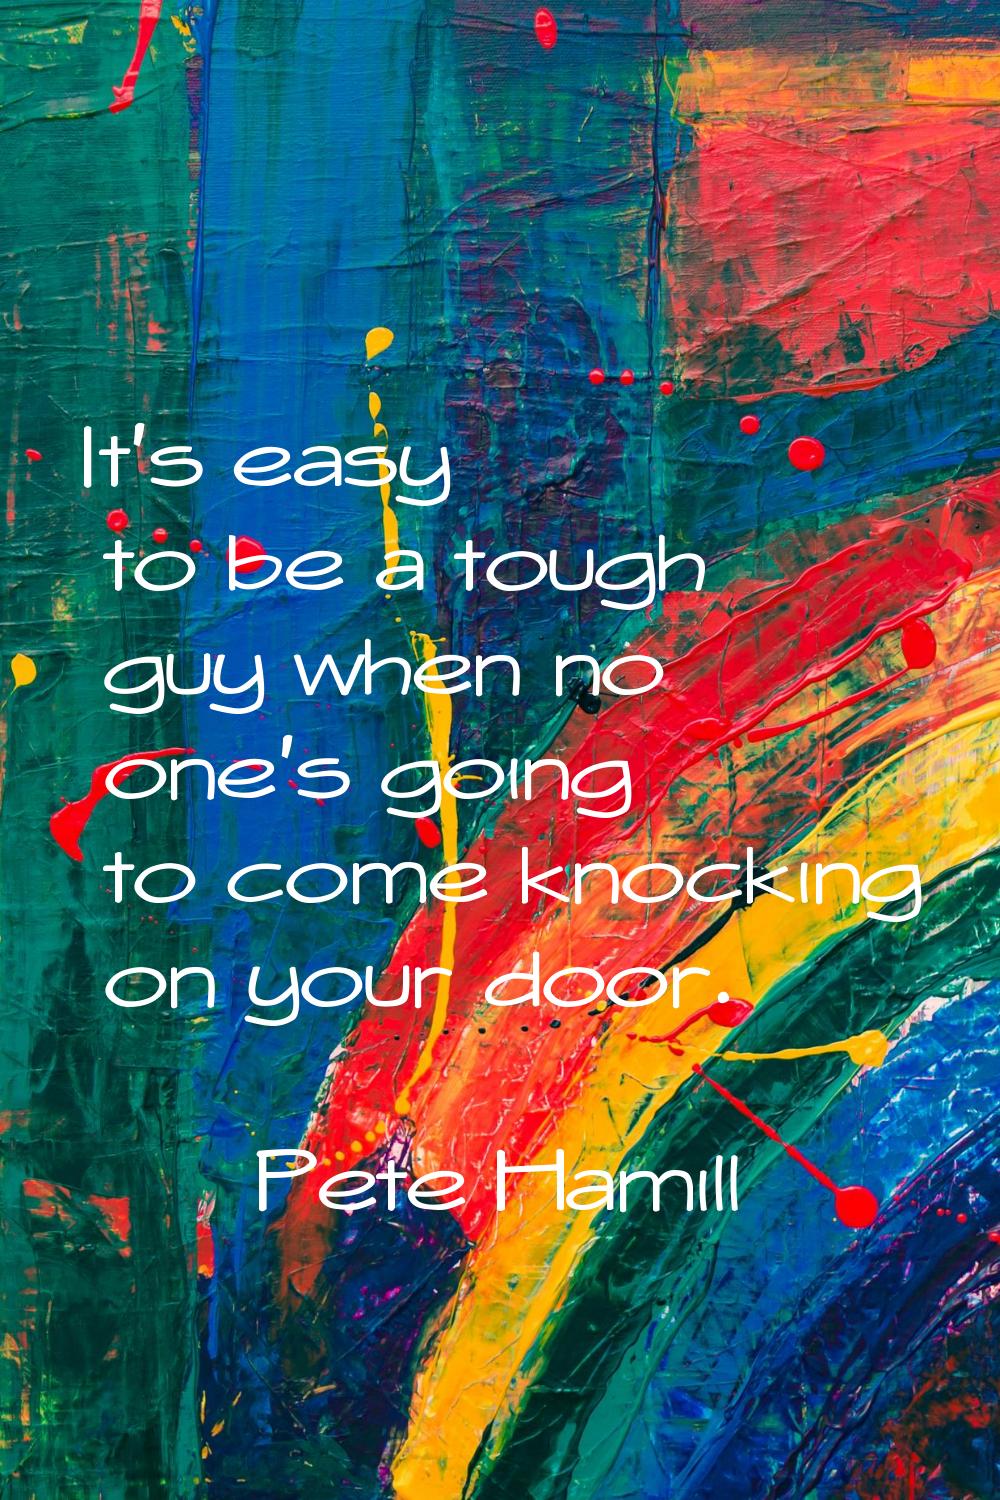 It's easy to be a tough guy when no one's going to come knocking on your door.